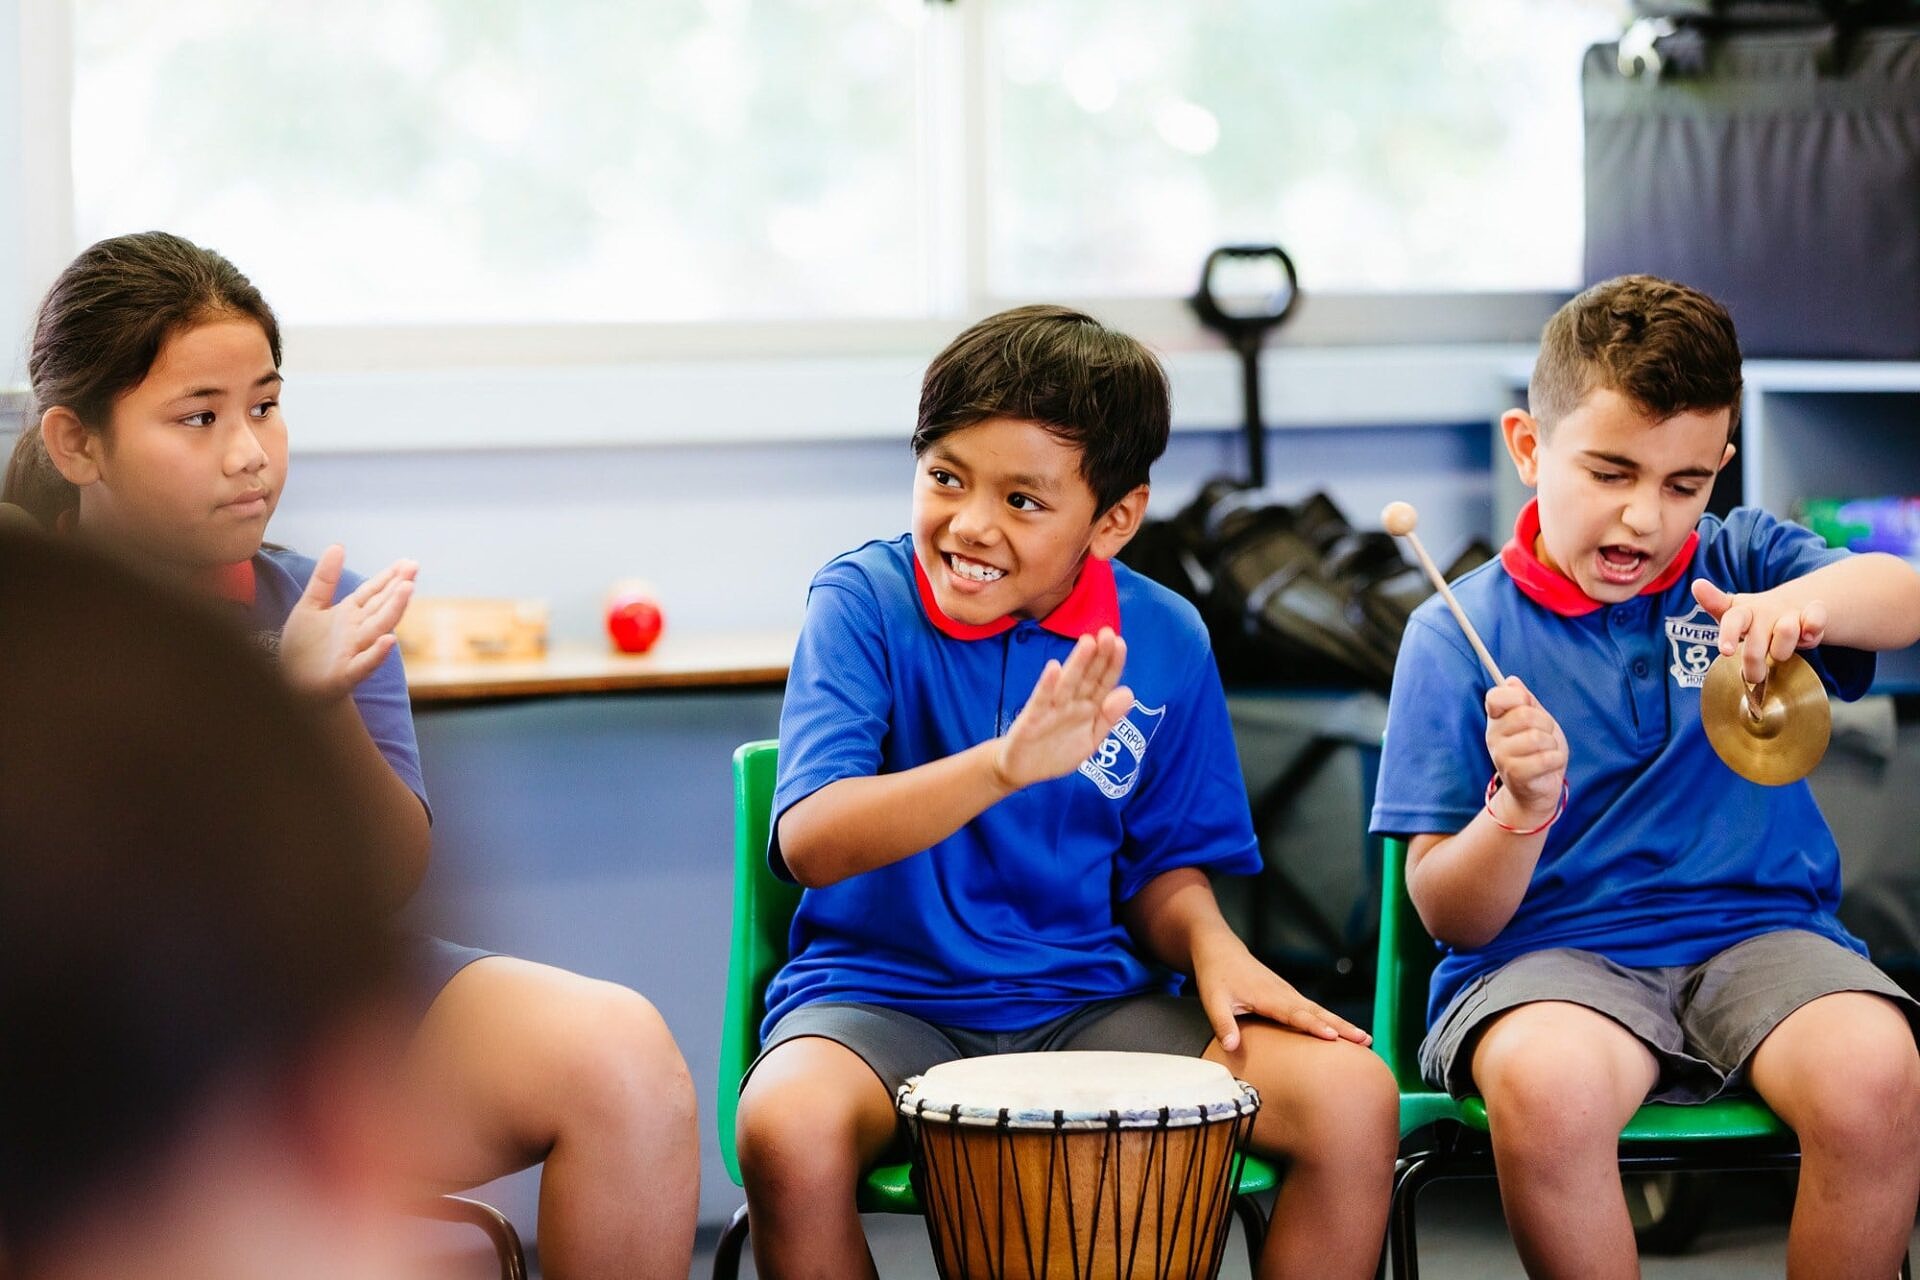 Students in the classroom playing percussion instruments.